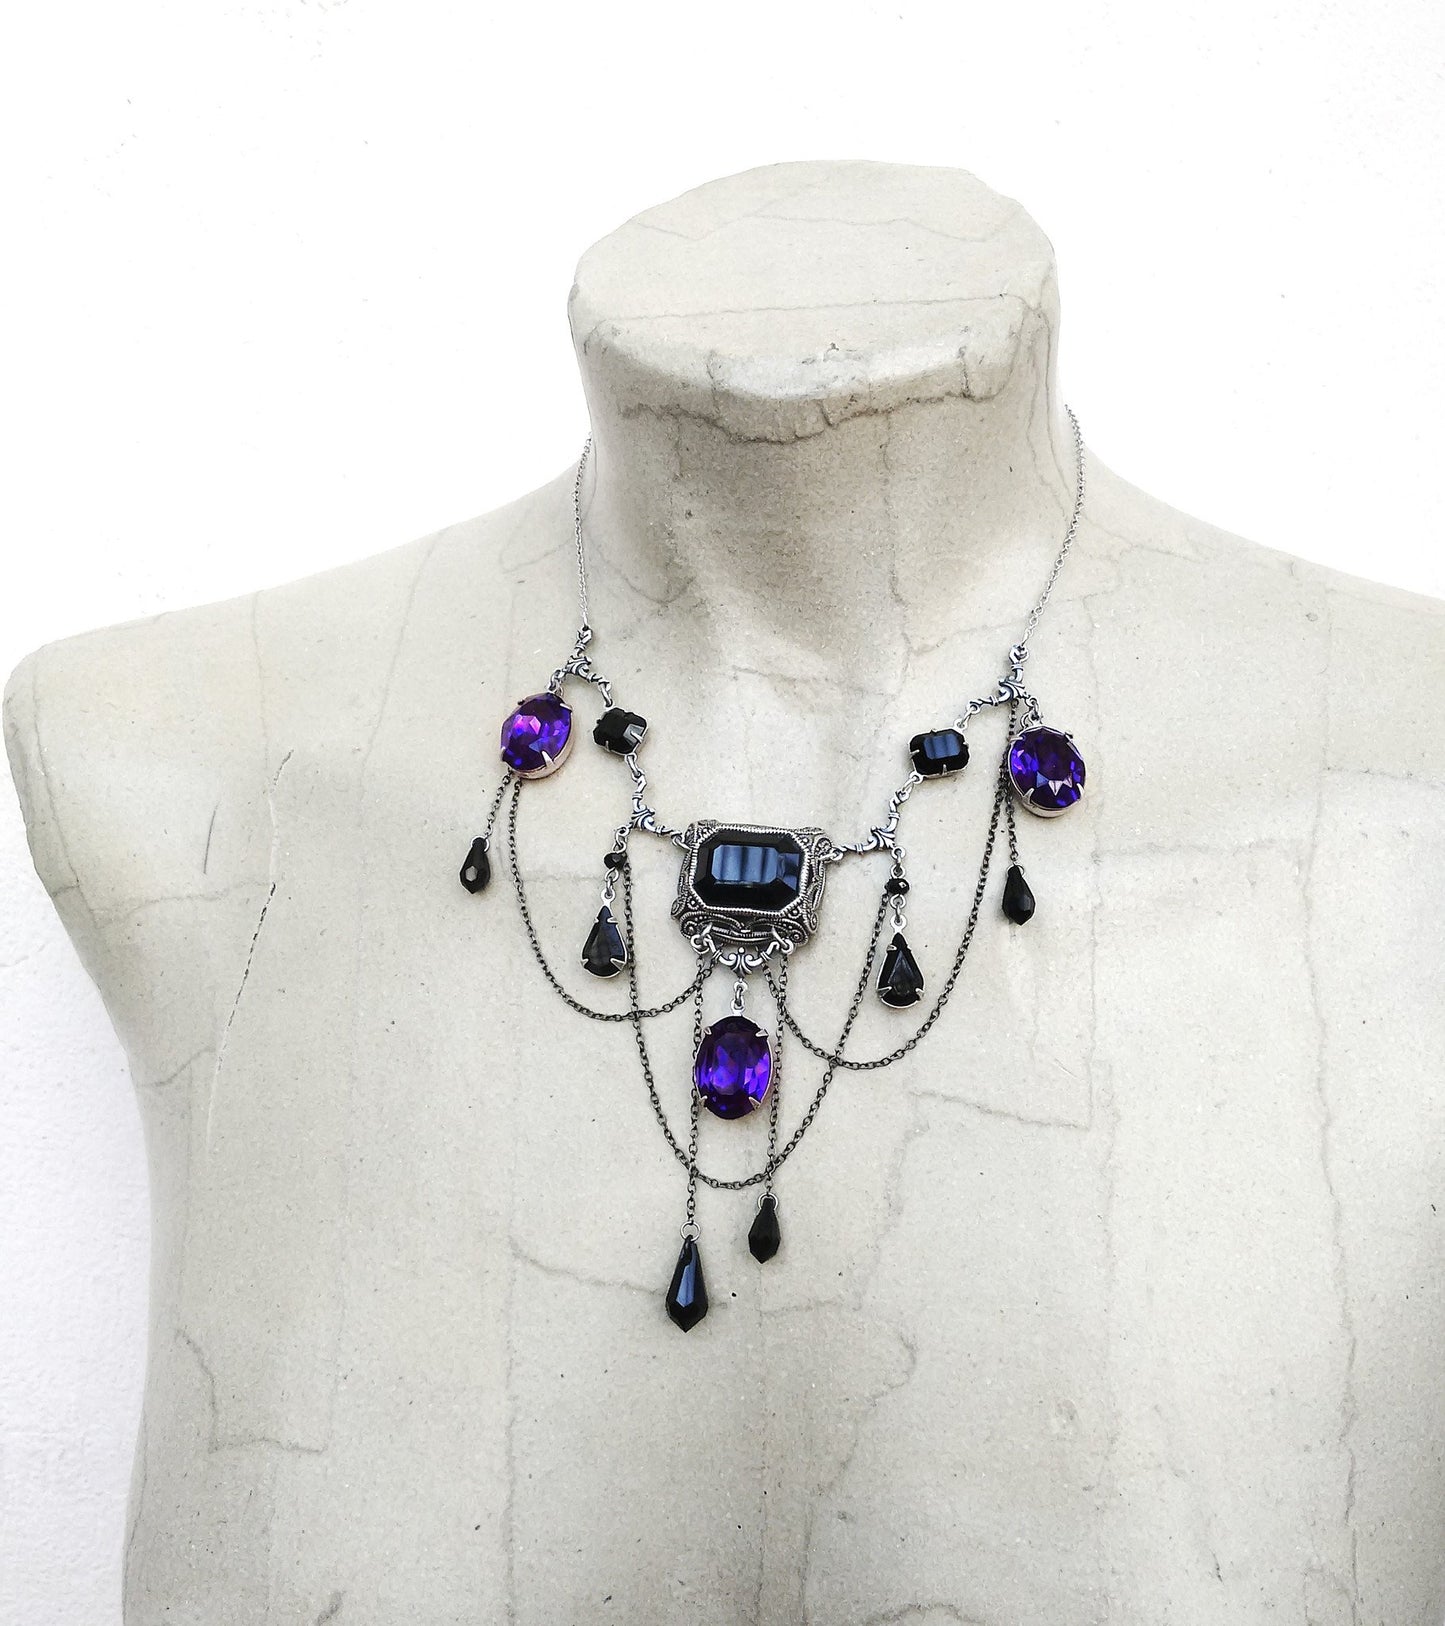 Black and Purple Gothic Necklace - Aranwen's Jewelry
 - 1